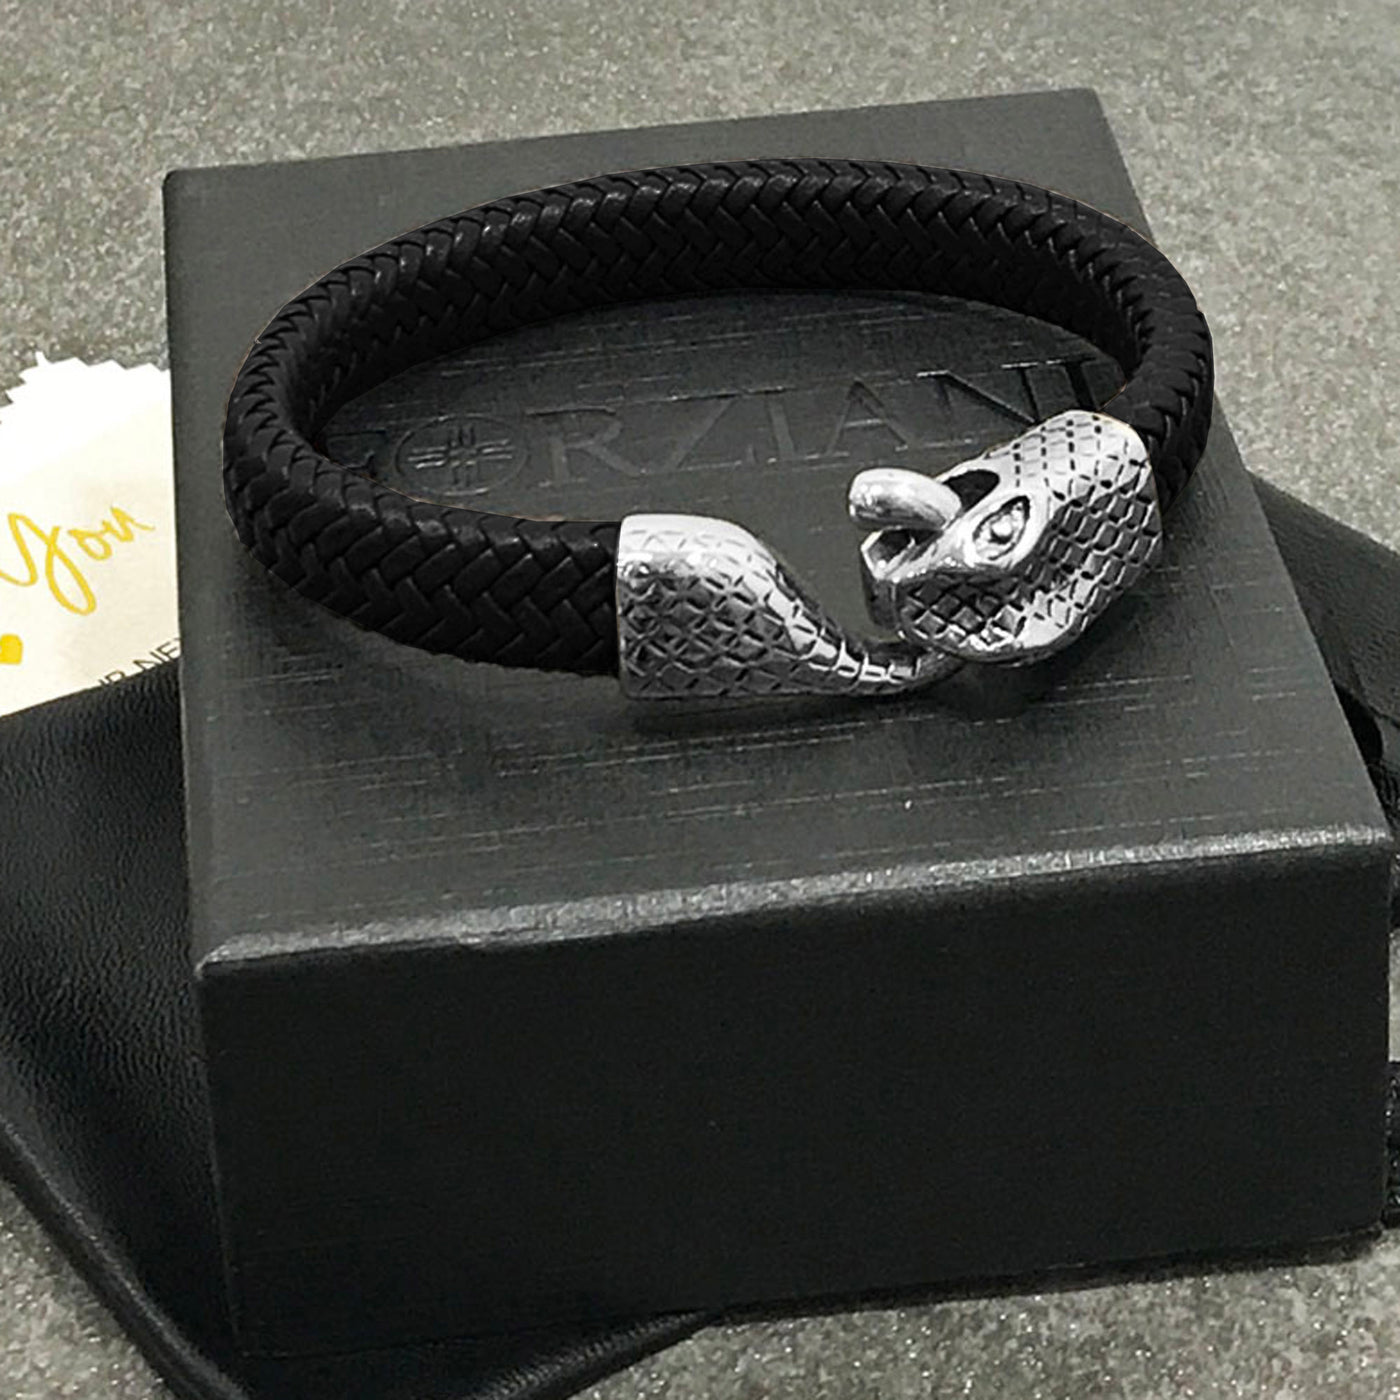 Ouroboros 'Eternity Snake' Leather and Steel Bracelet